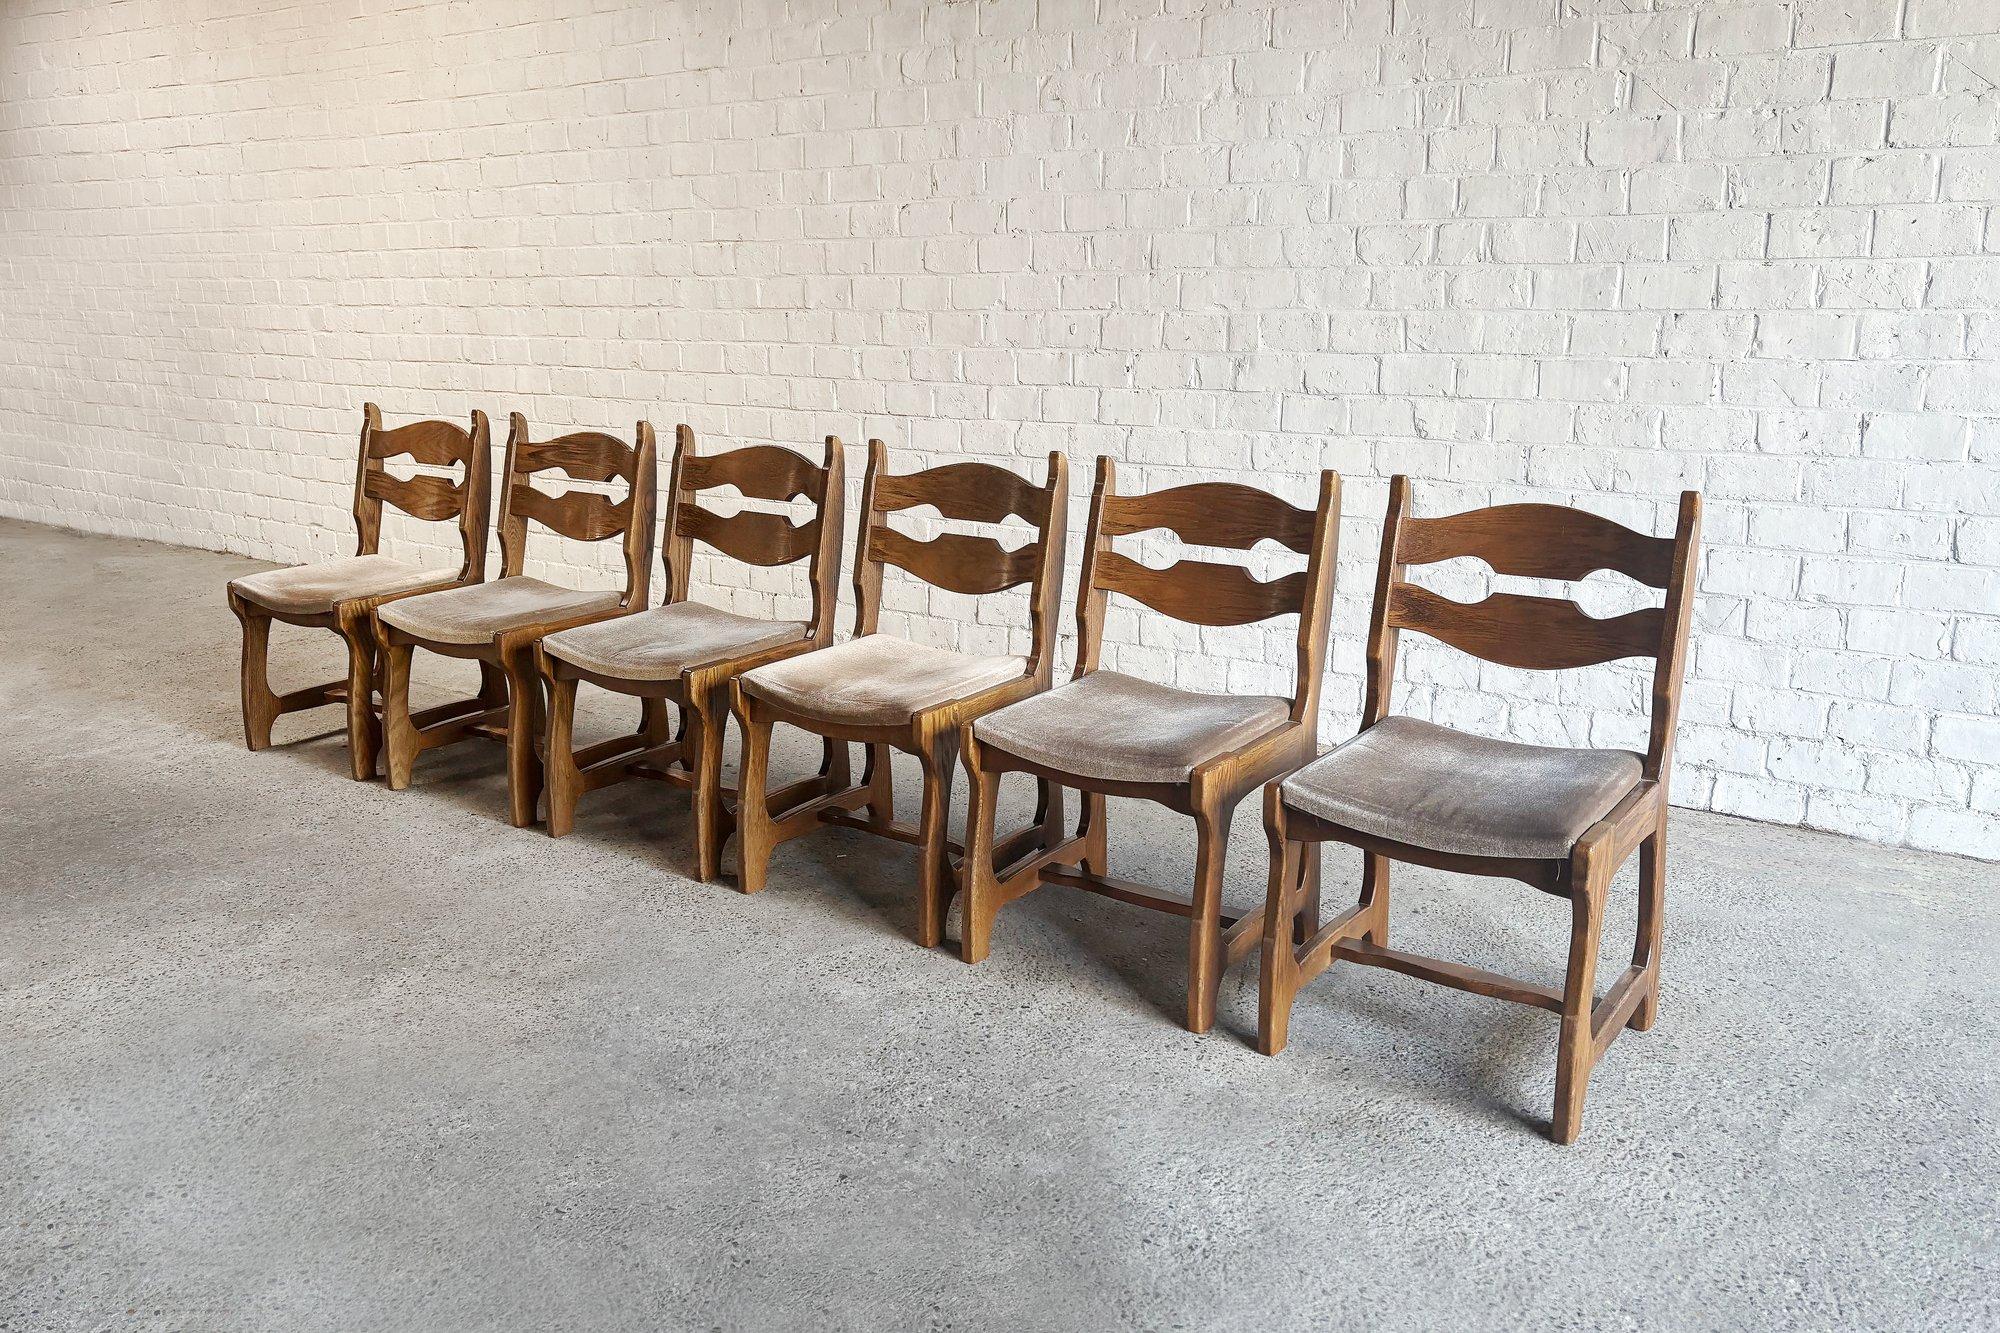 Magnificent and unusual set of 6 massive oak chairs designed by Guillerme and Chambron for Votre Maison, circa 1950. Original beige velvet seats. These chairs convey a brutalist yet organic look.